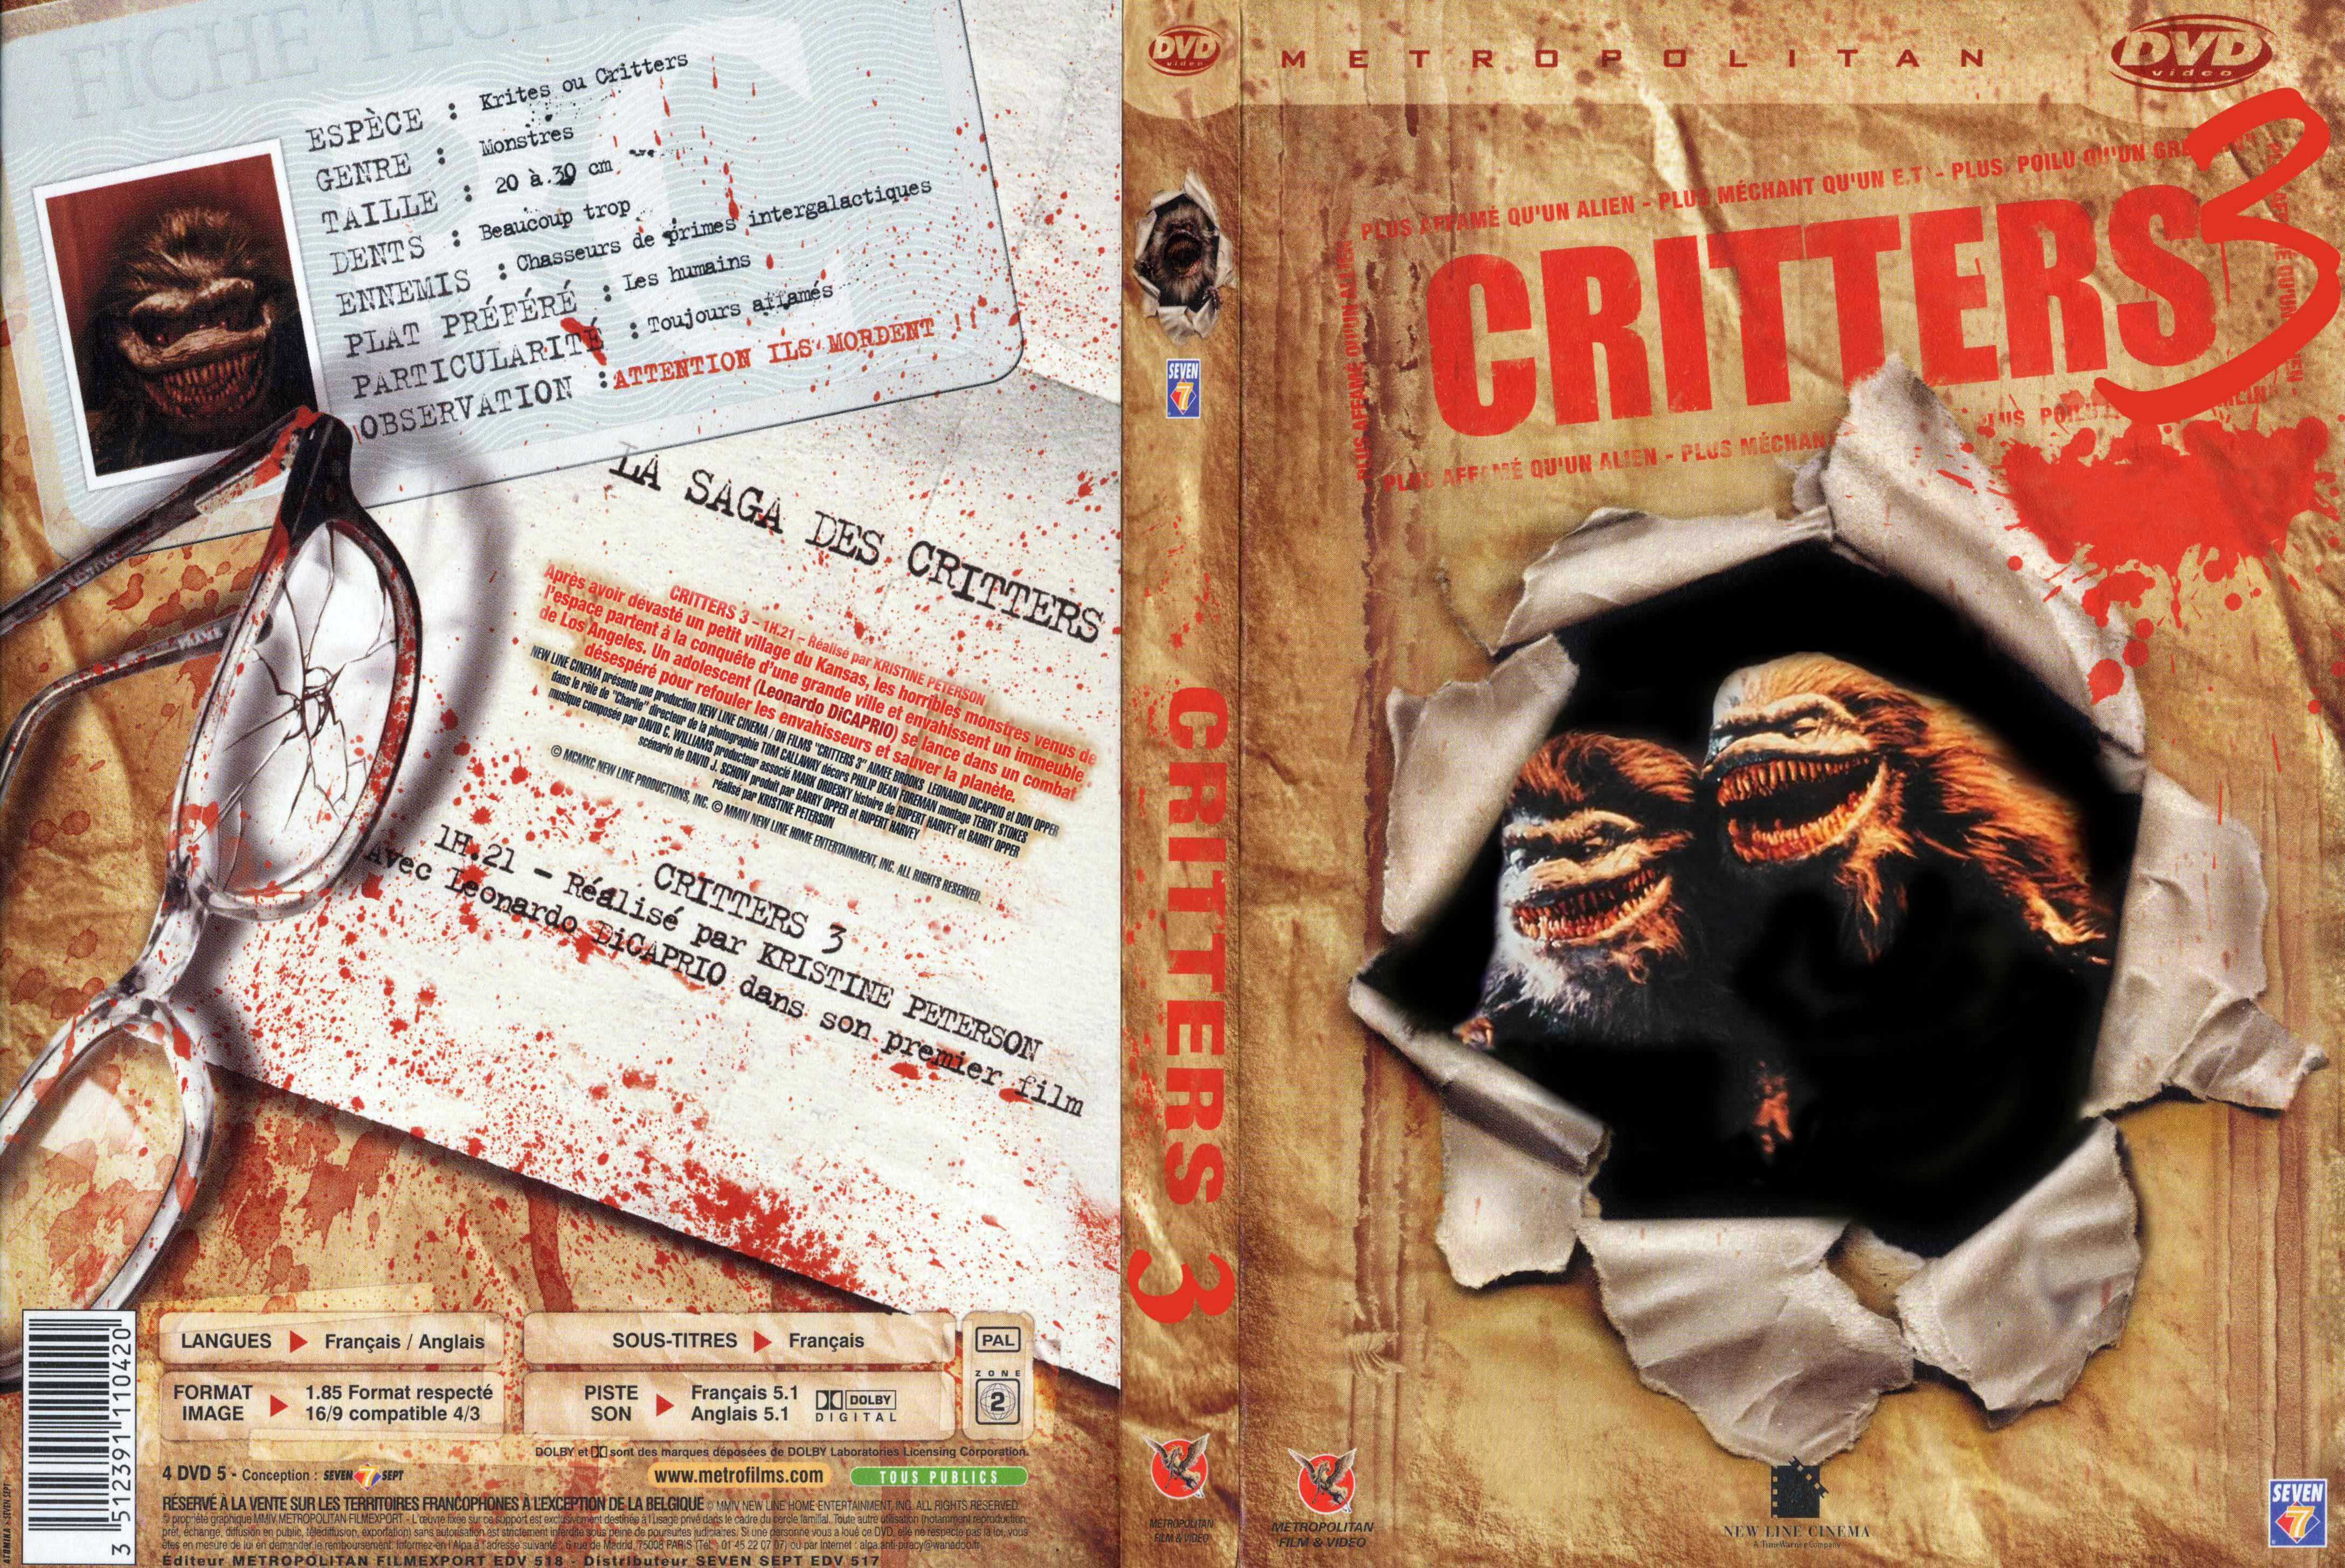 Jaquette DVD Critters 3